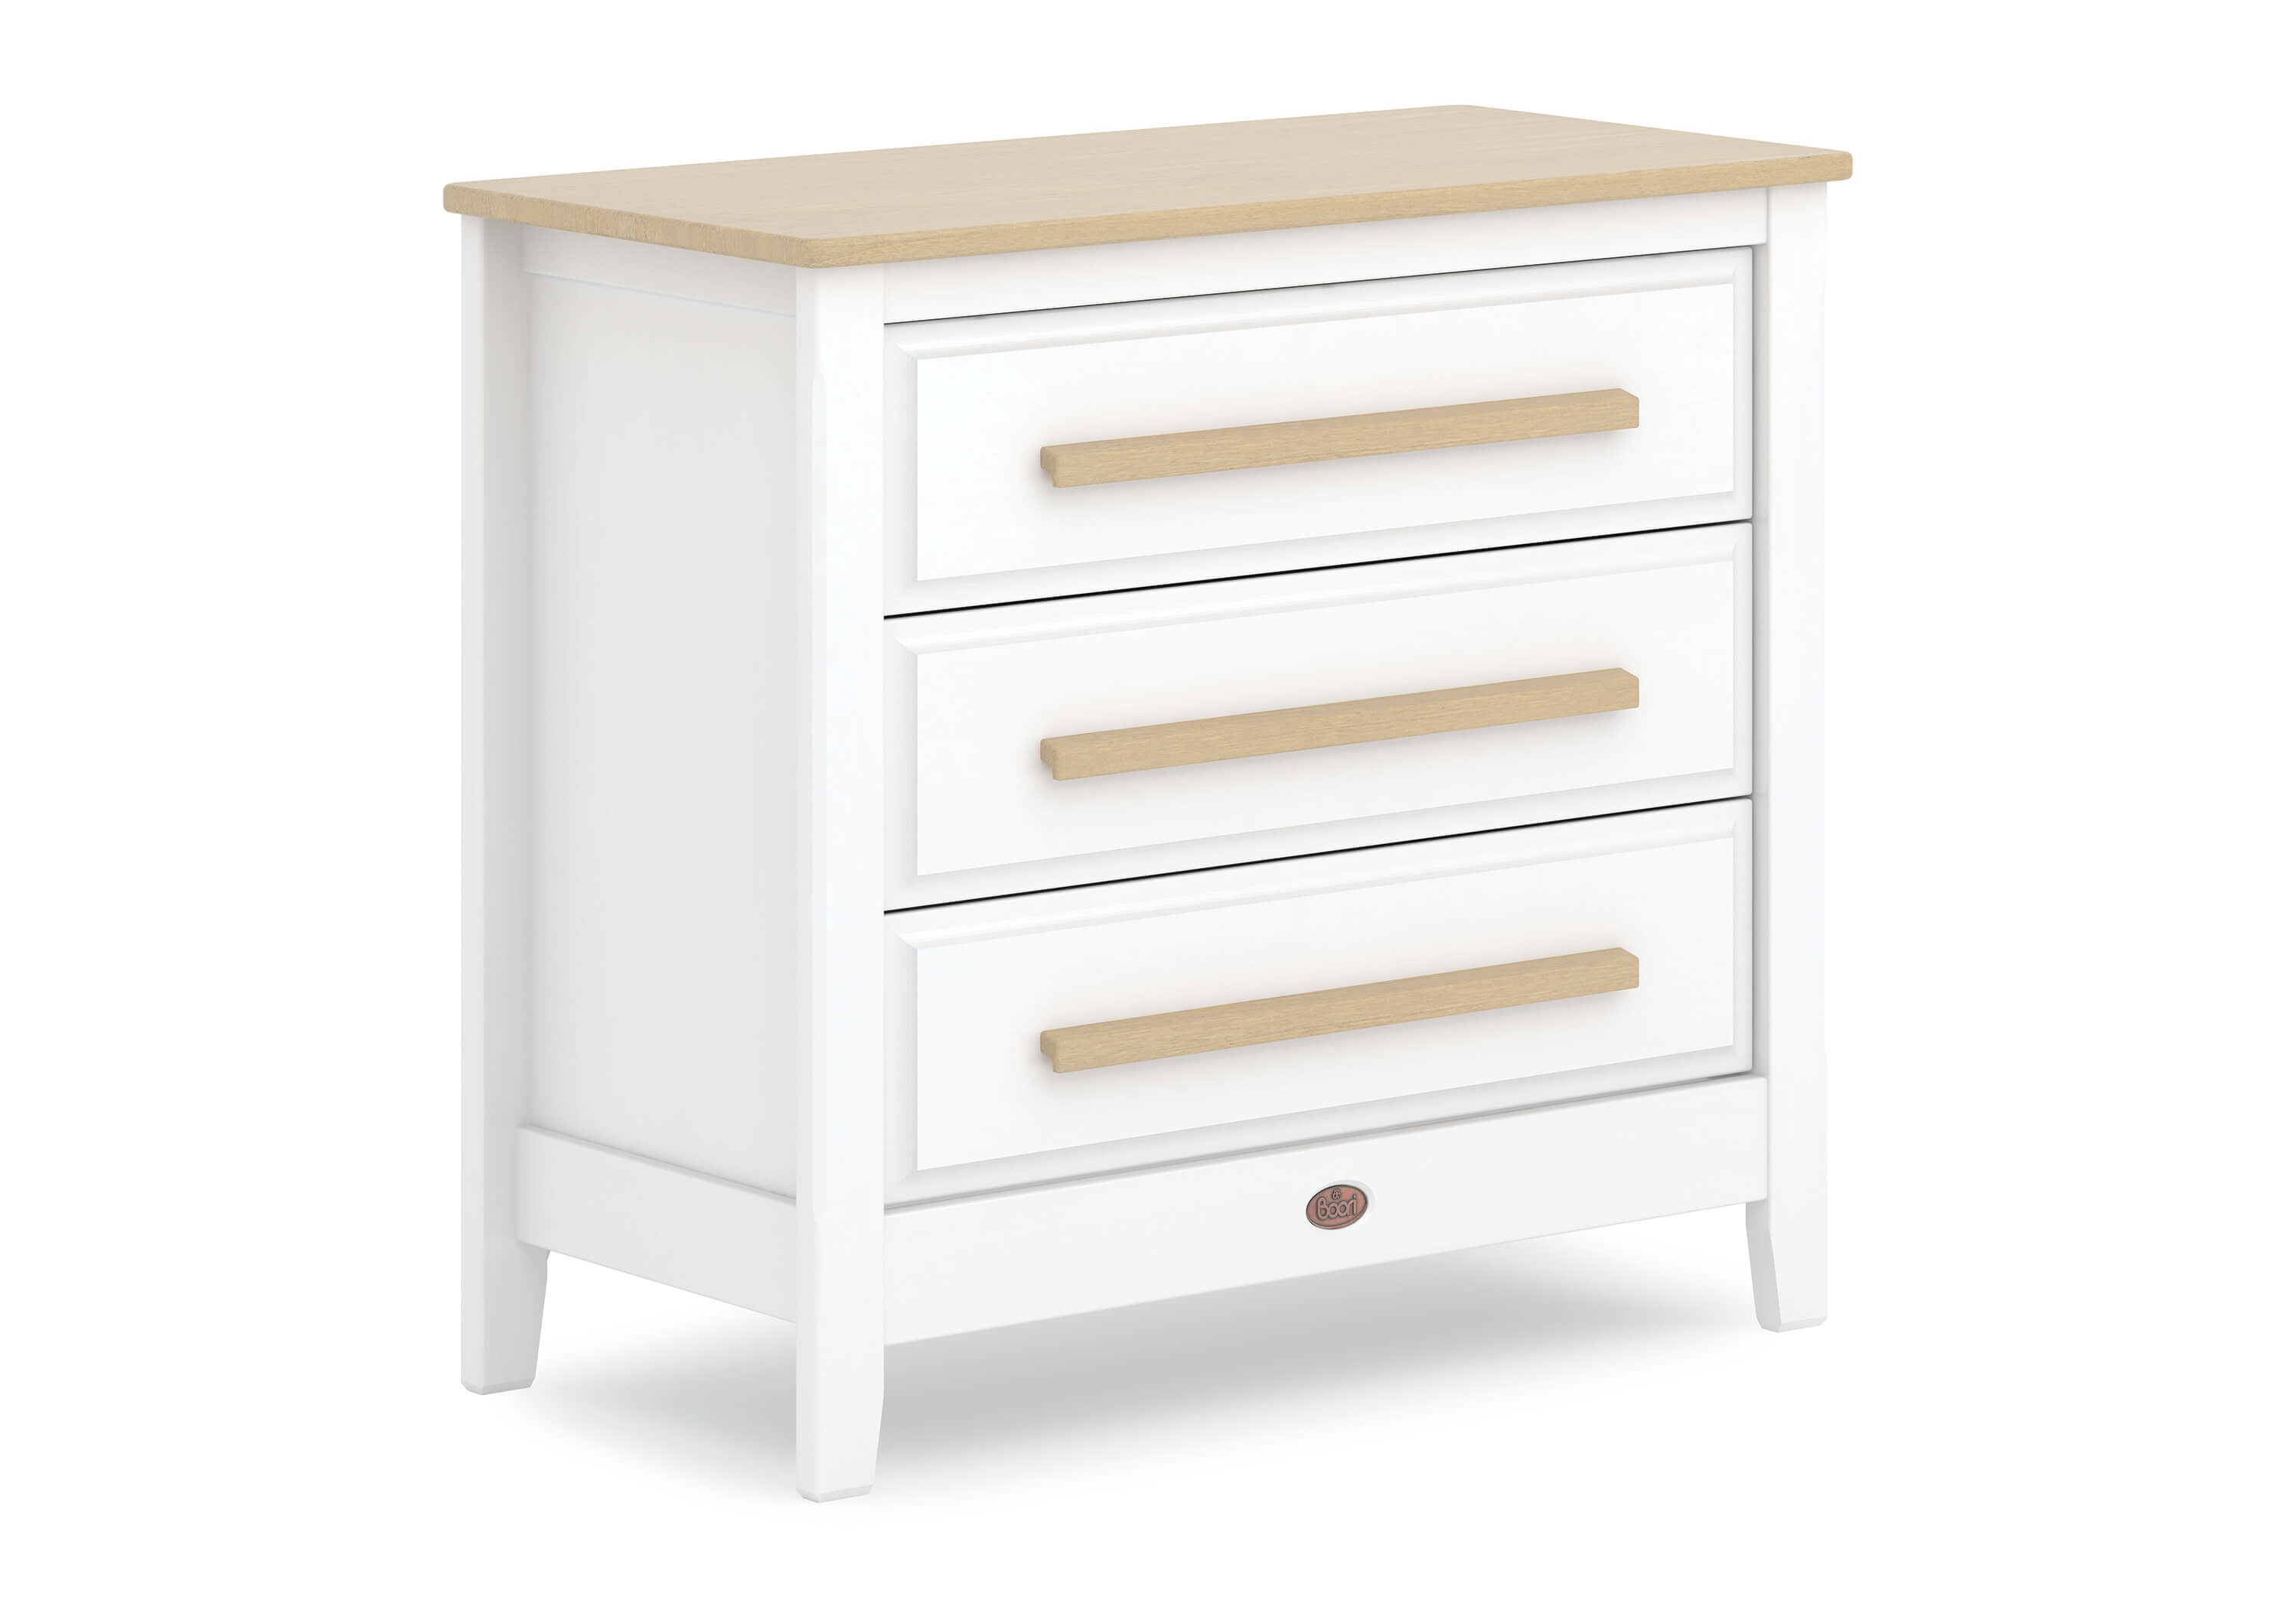 Boori Linear Chest of Drawers - White & Almond